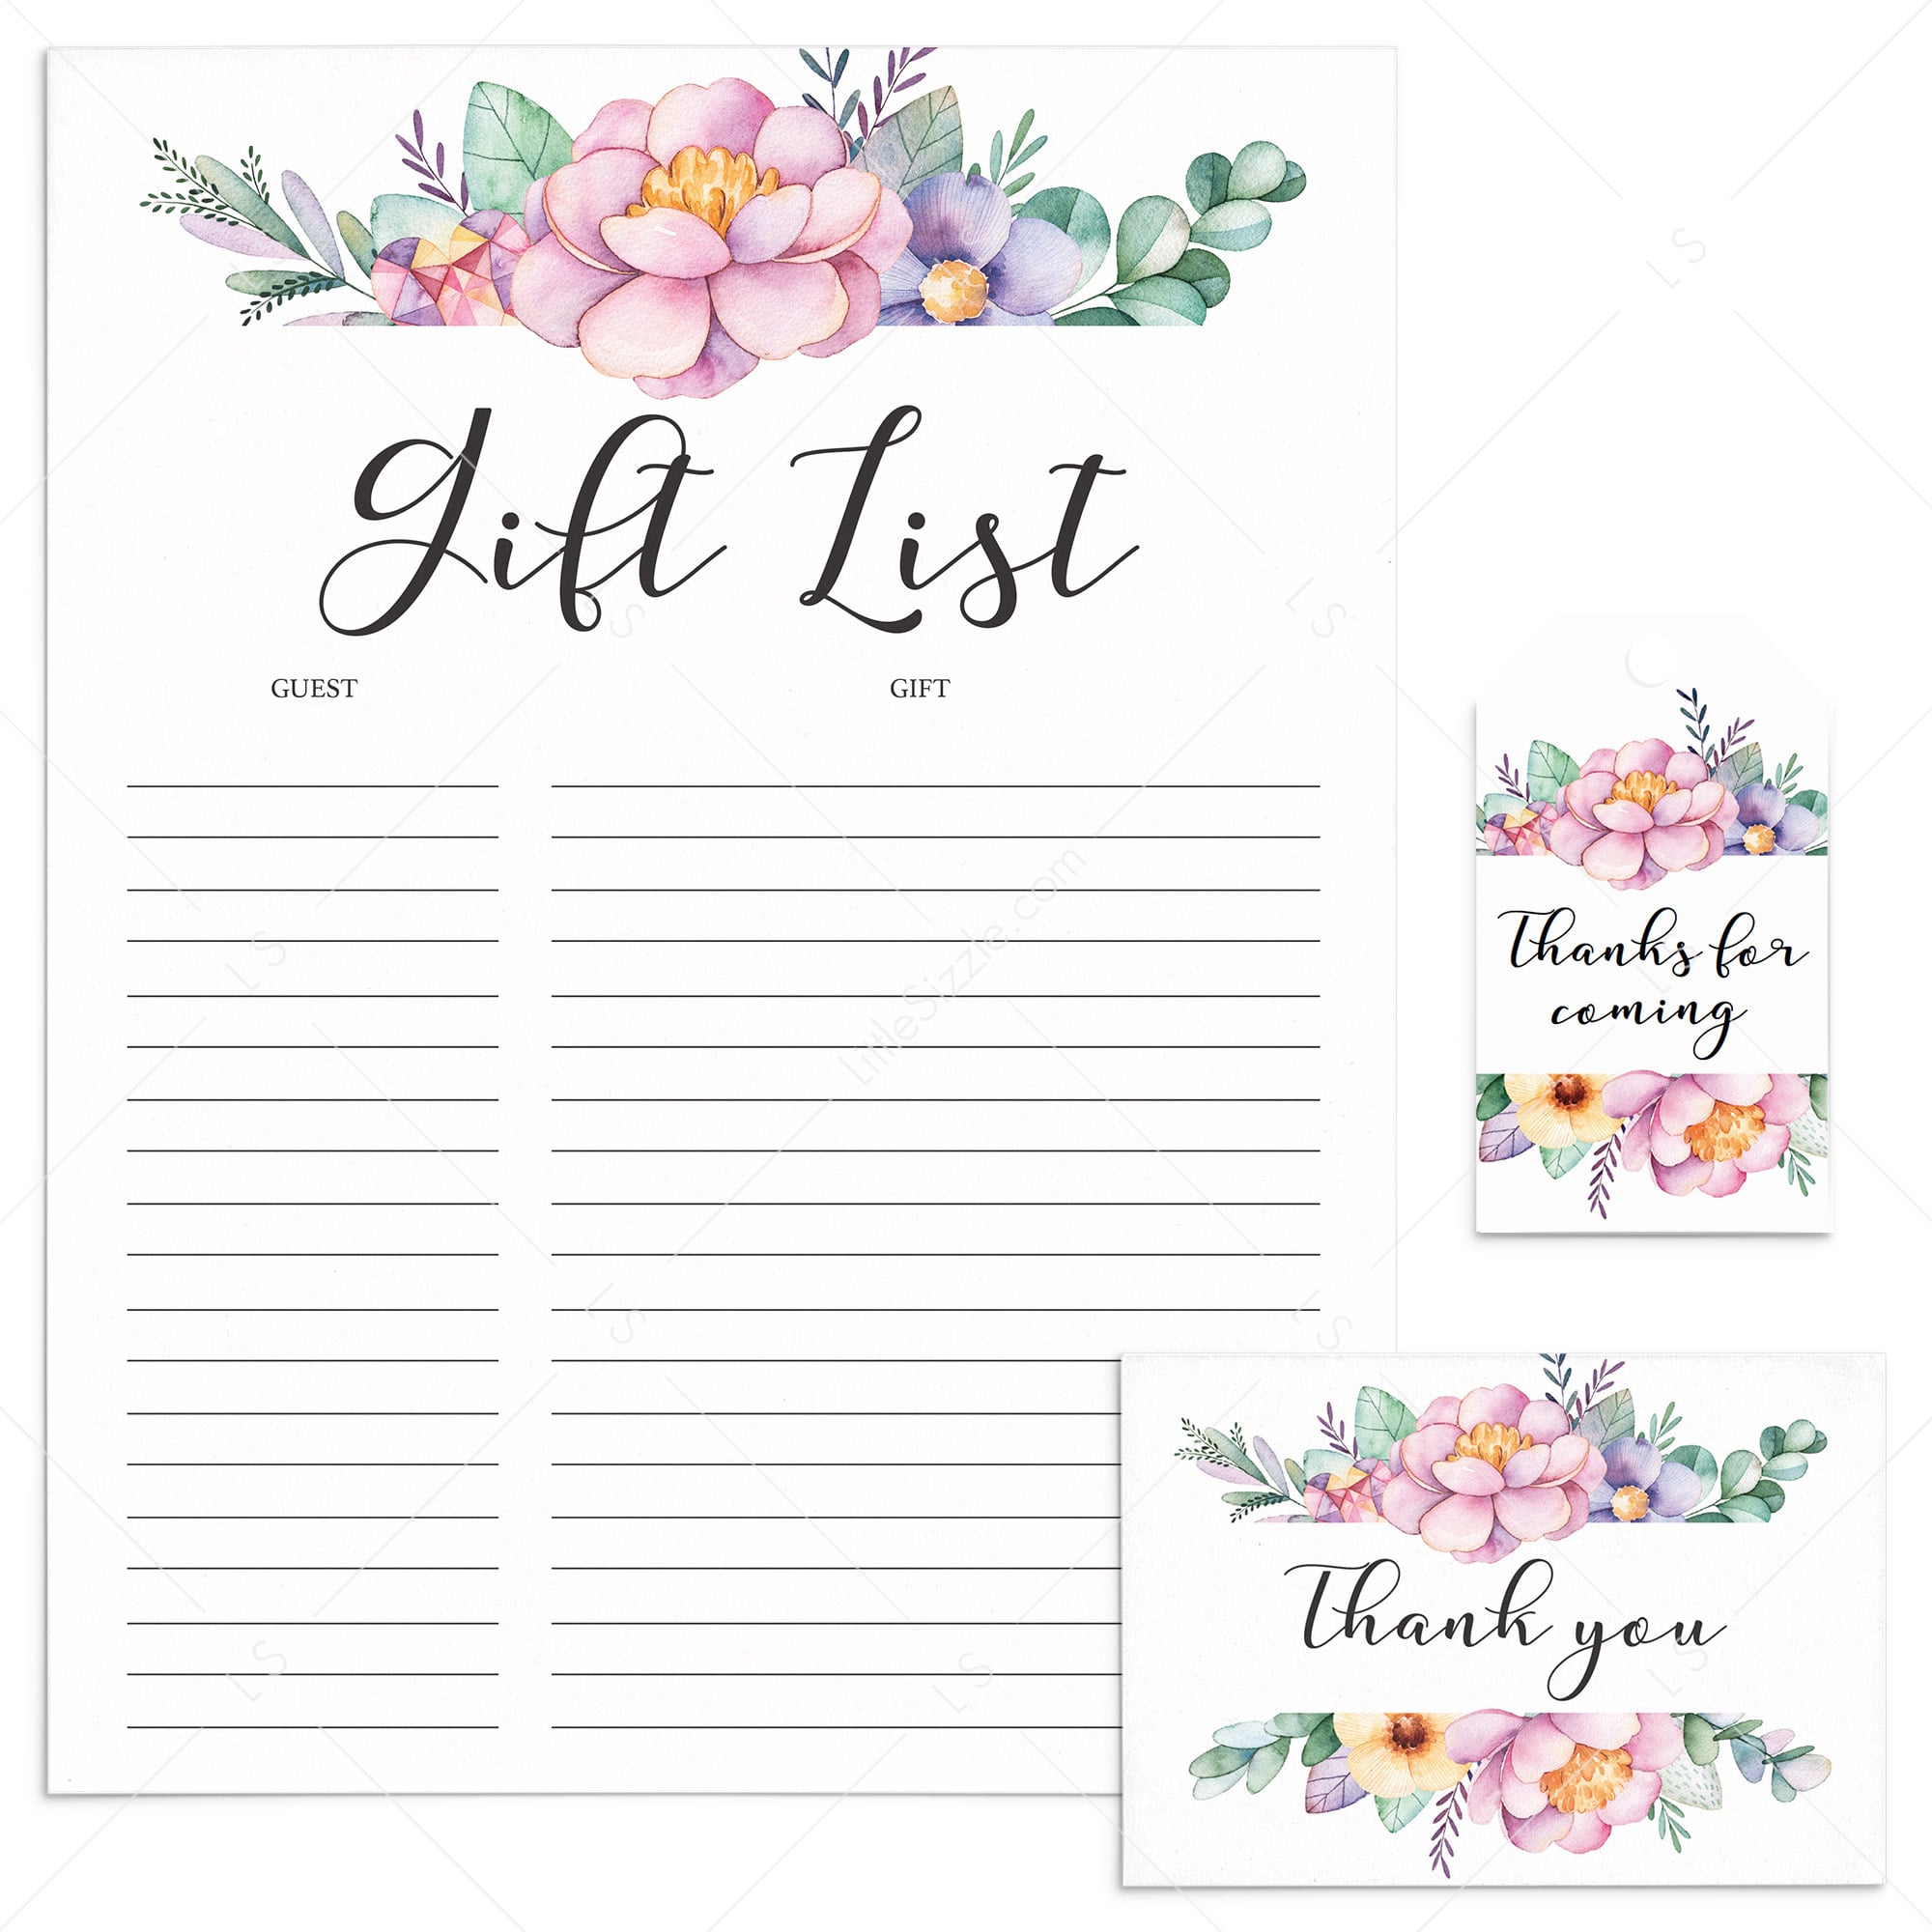 Printable thank you cards, gift list and favor tags with purple flowers by LittleSizzle